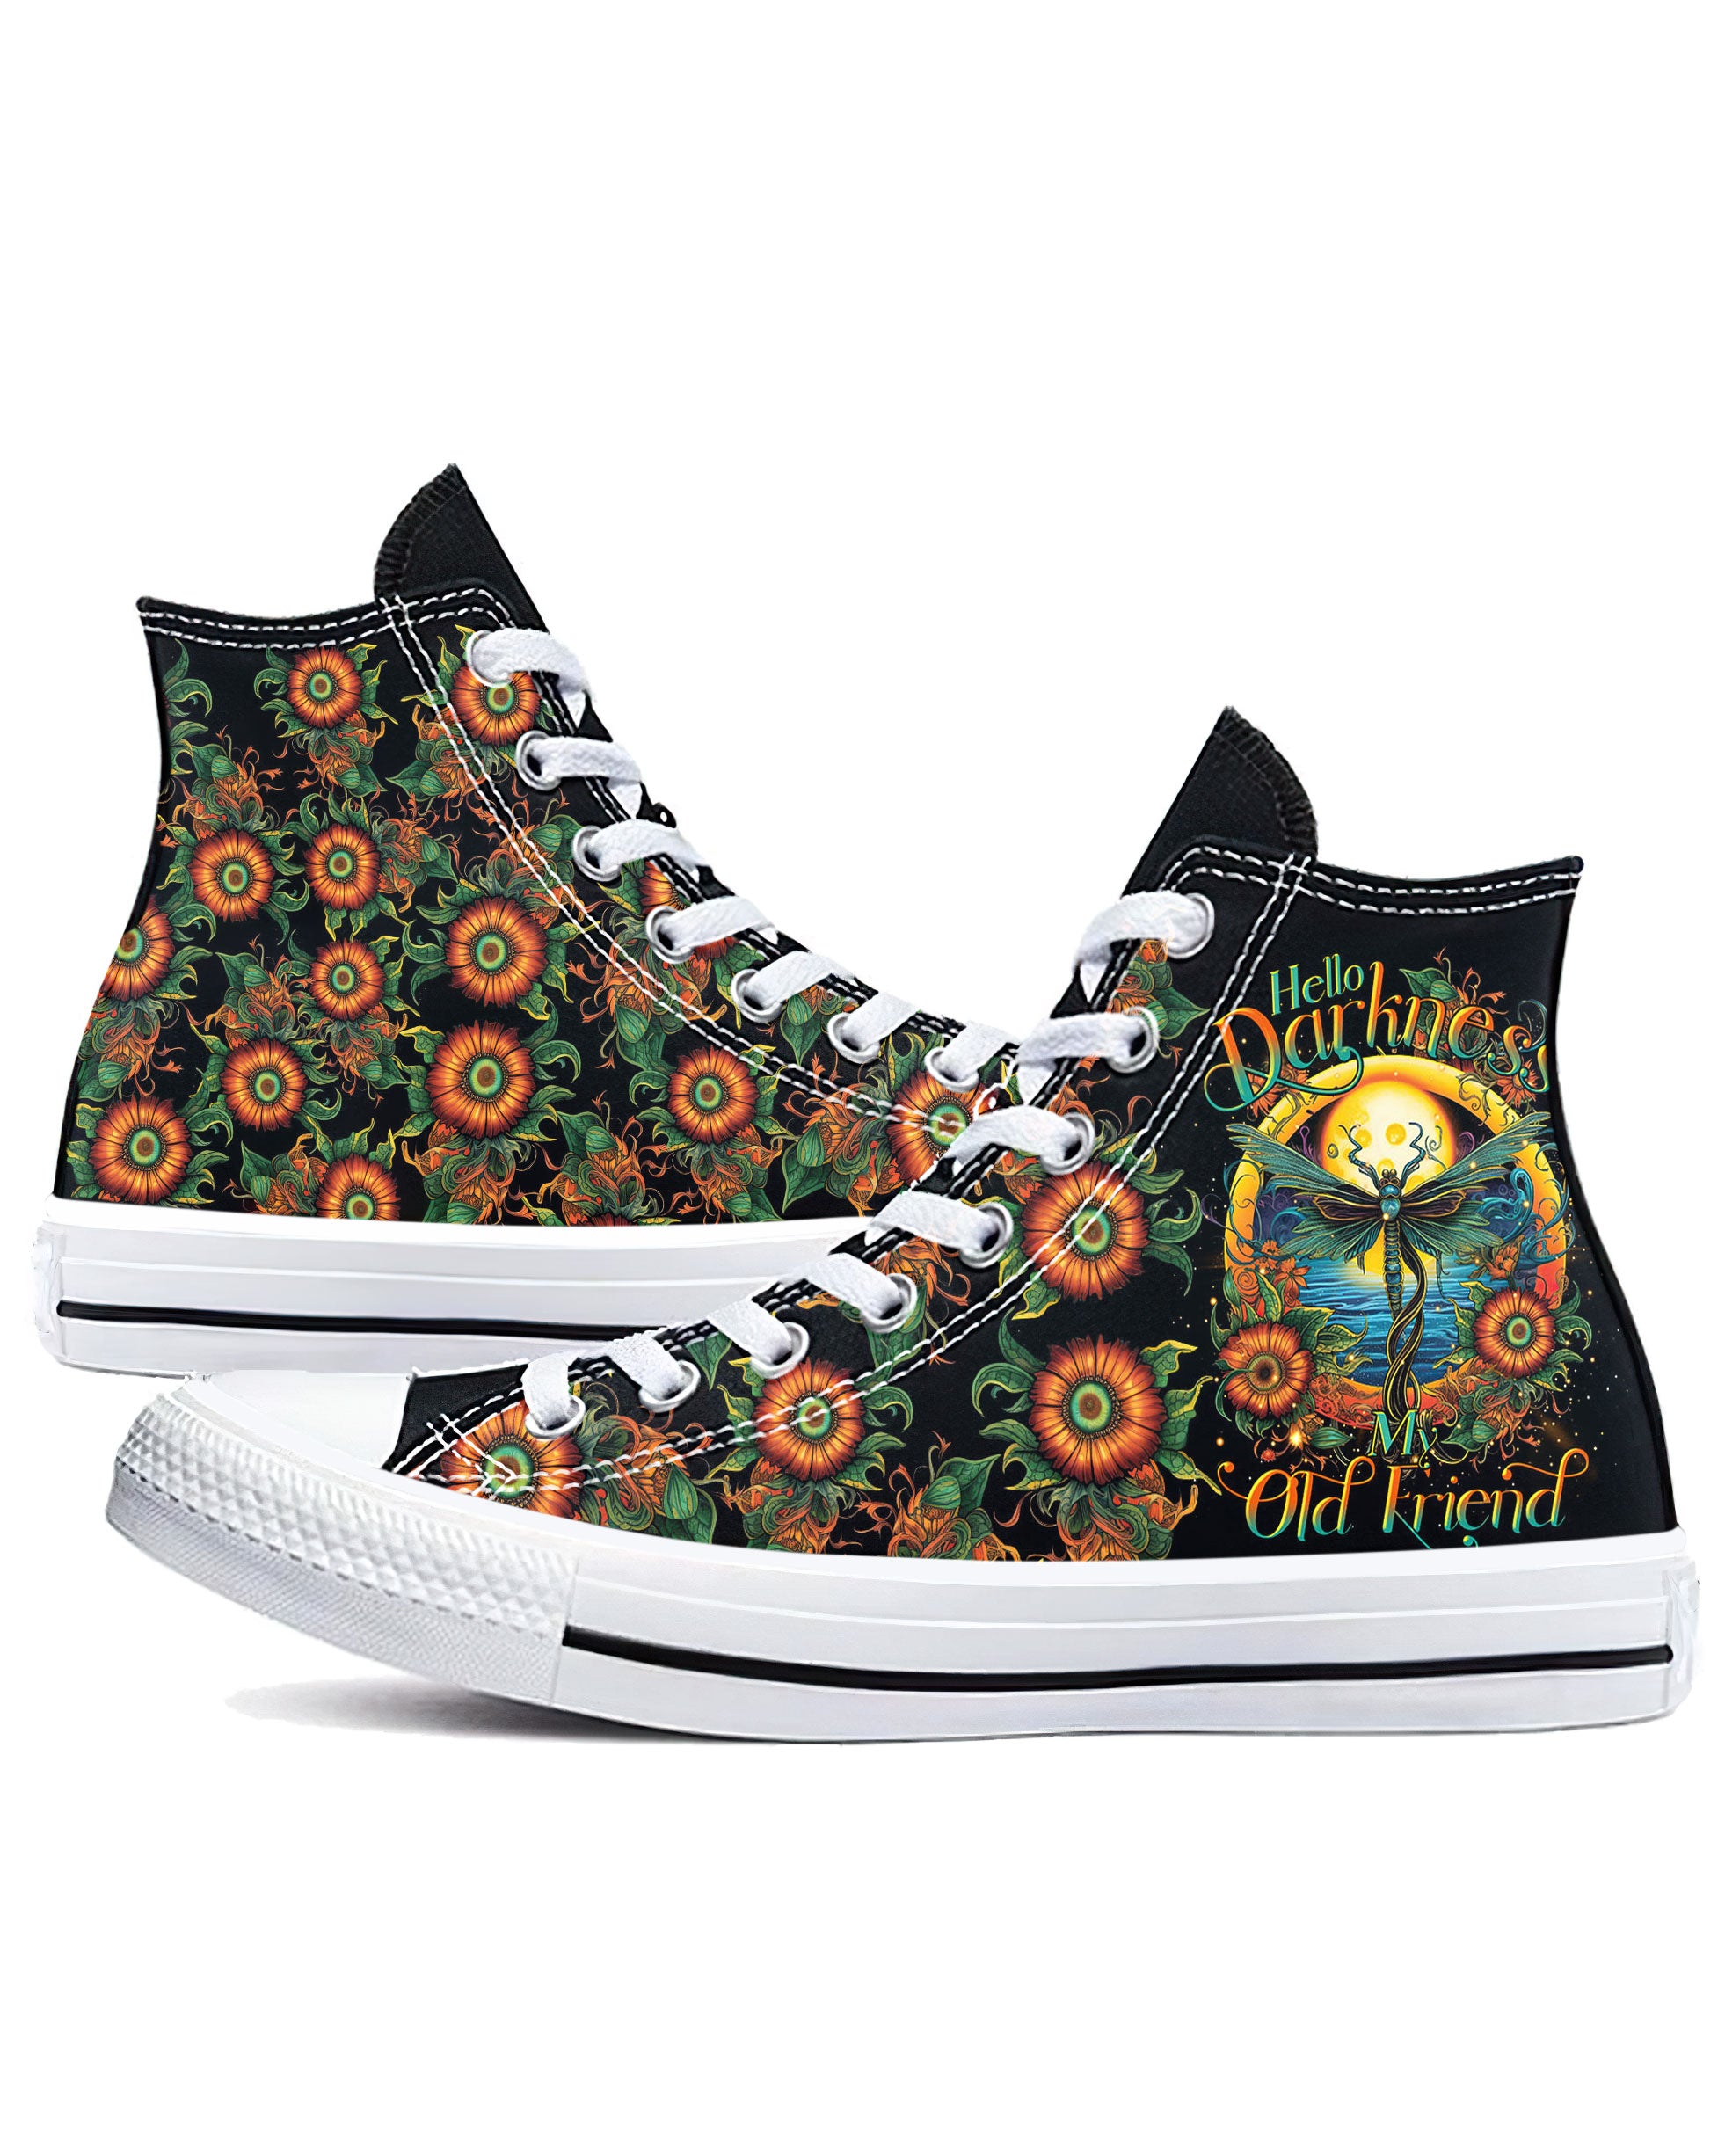 HELLO DARKNESS MY OLD FRIEND DRAGONFLY HIGH TOP CANVAS SHOES - TLTR1007233